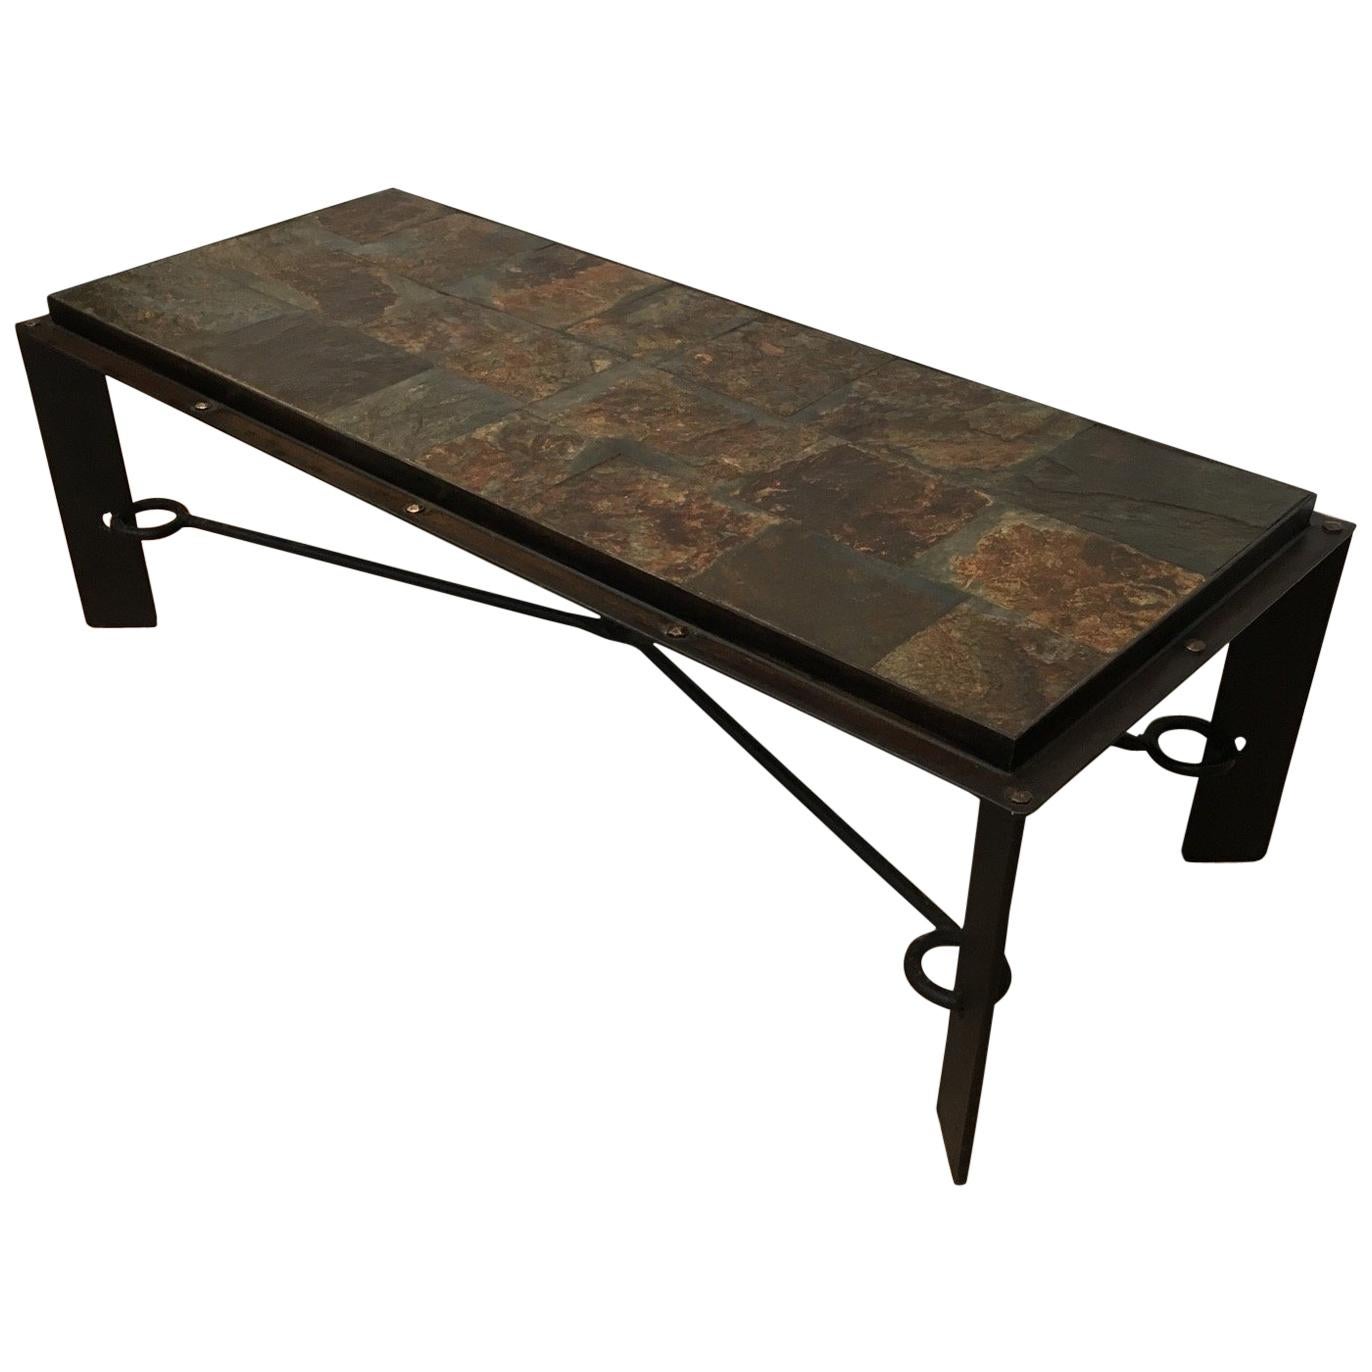 Rare Steel and Iron Coffee Table with Lava Stone Top, circa 1940